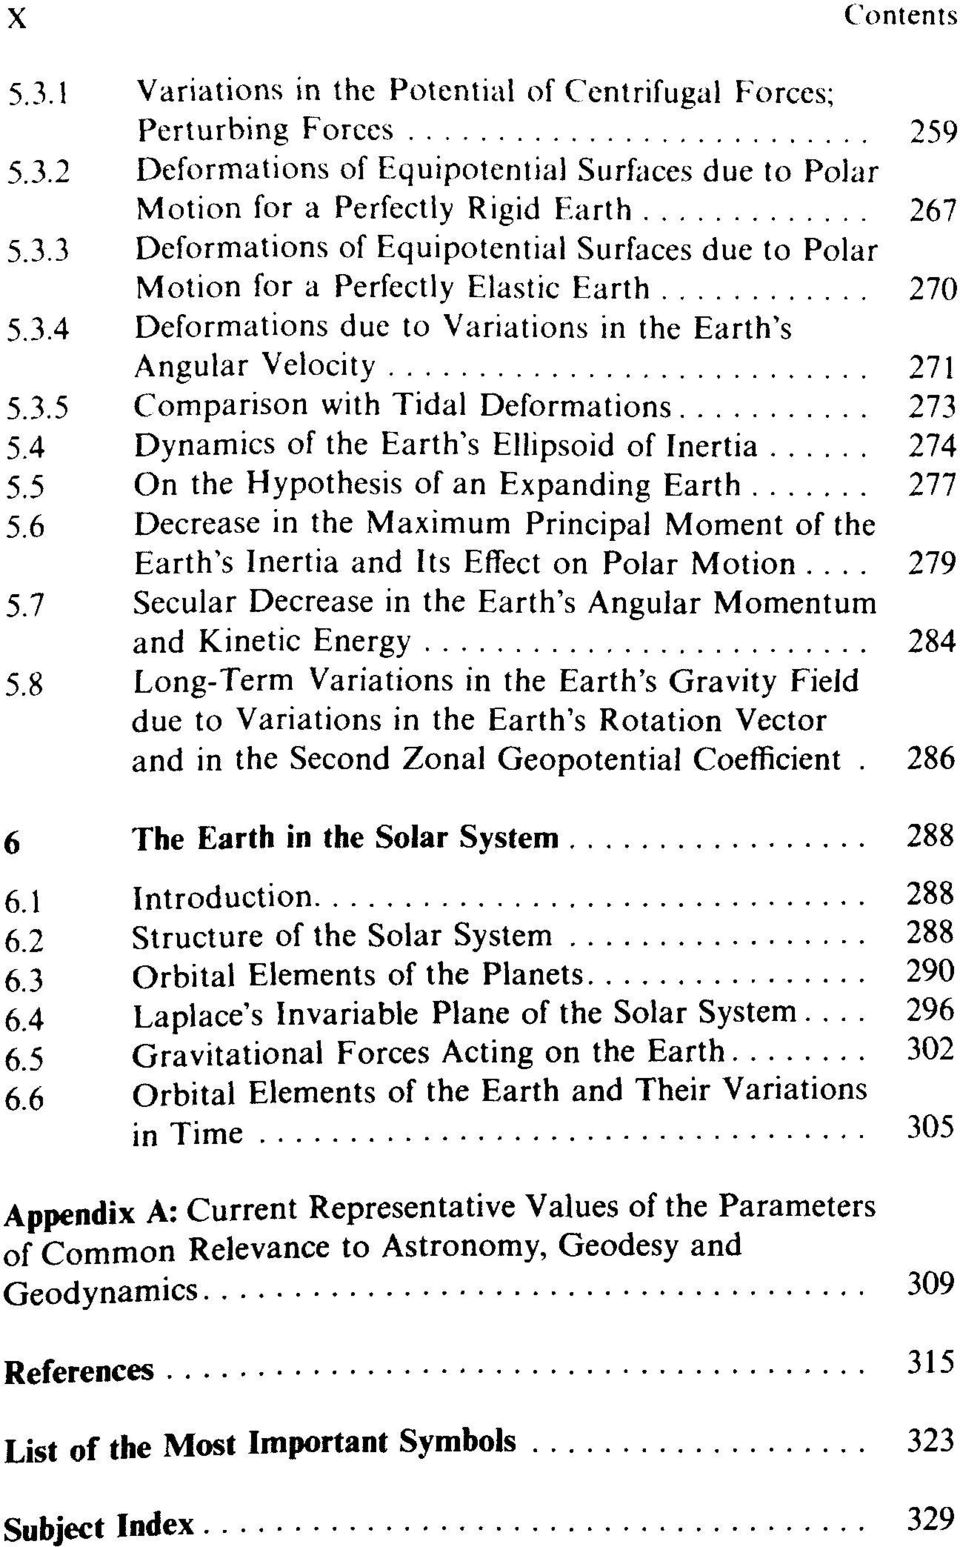 5 On the Hypothesis of an Expanding Earth 277 5.6 Decrease in the Maximum Principal Moment of the Earth's Inertia and Its Effect on Polar Motion... 279 5.